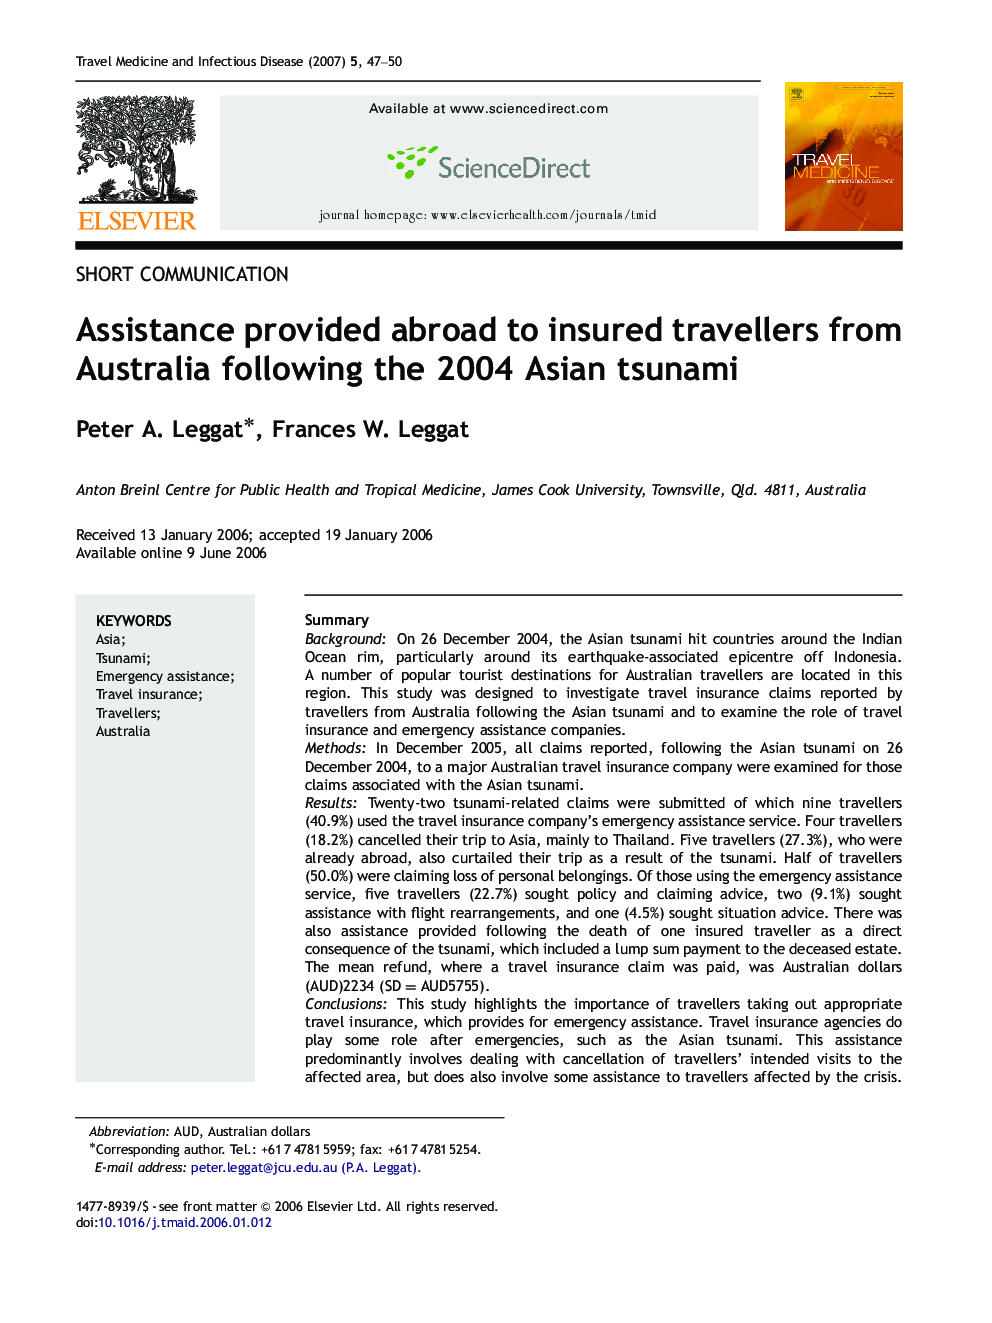 Assistance provided abroad to insured travellers from Australia following the 2004 Asian tsunami